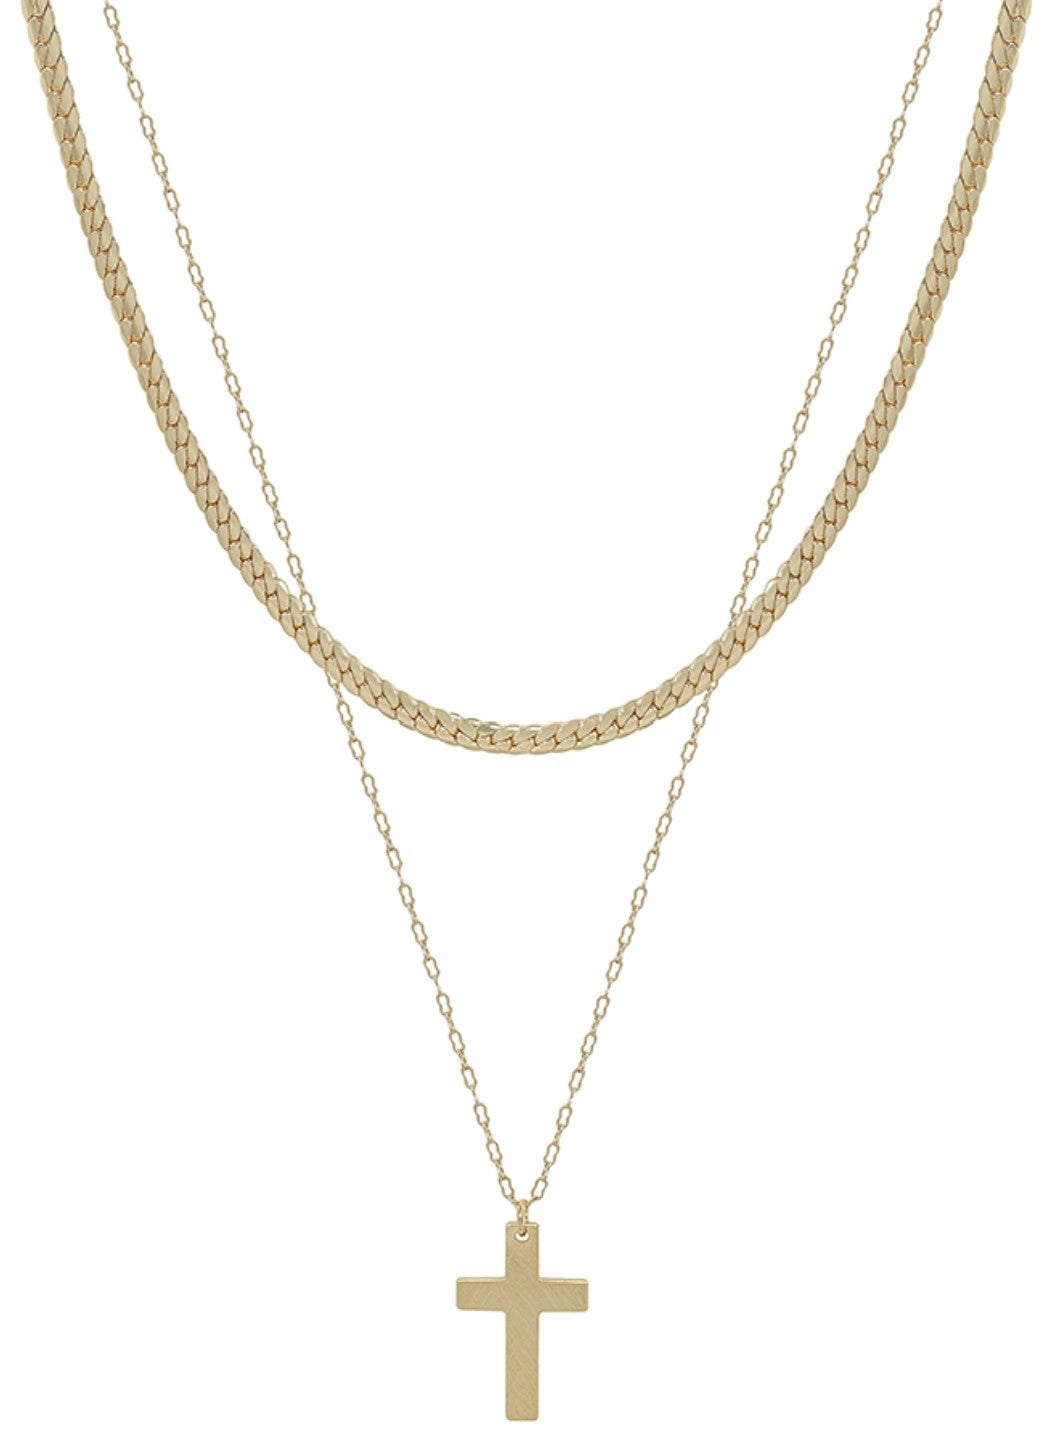 Rise Up Double Layered Snake Chain and Cross Pendant Necklace. Gold